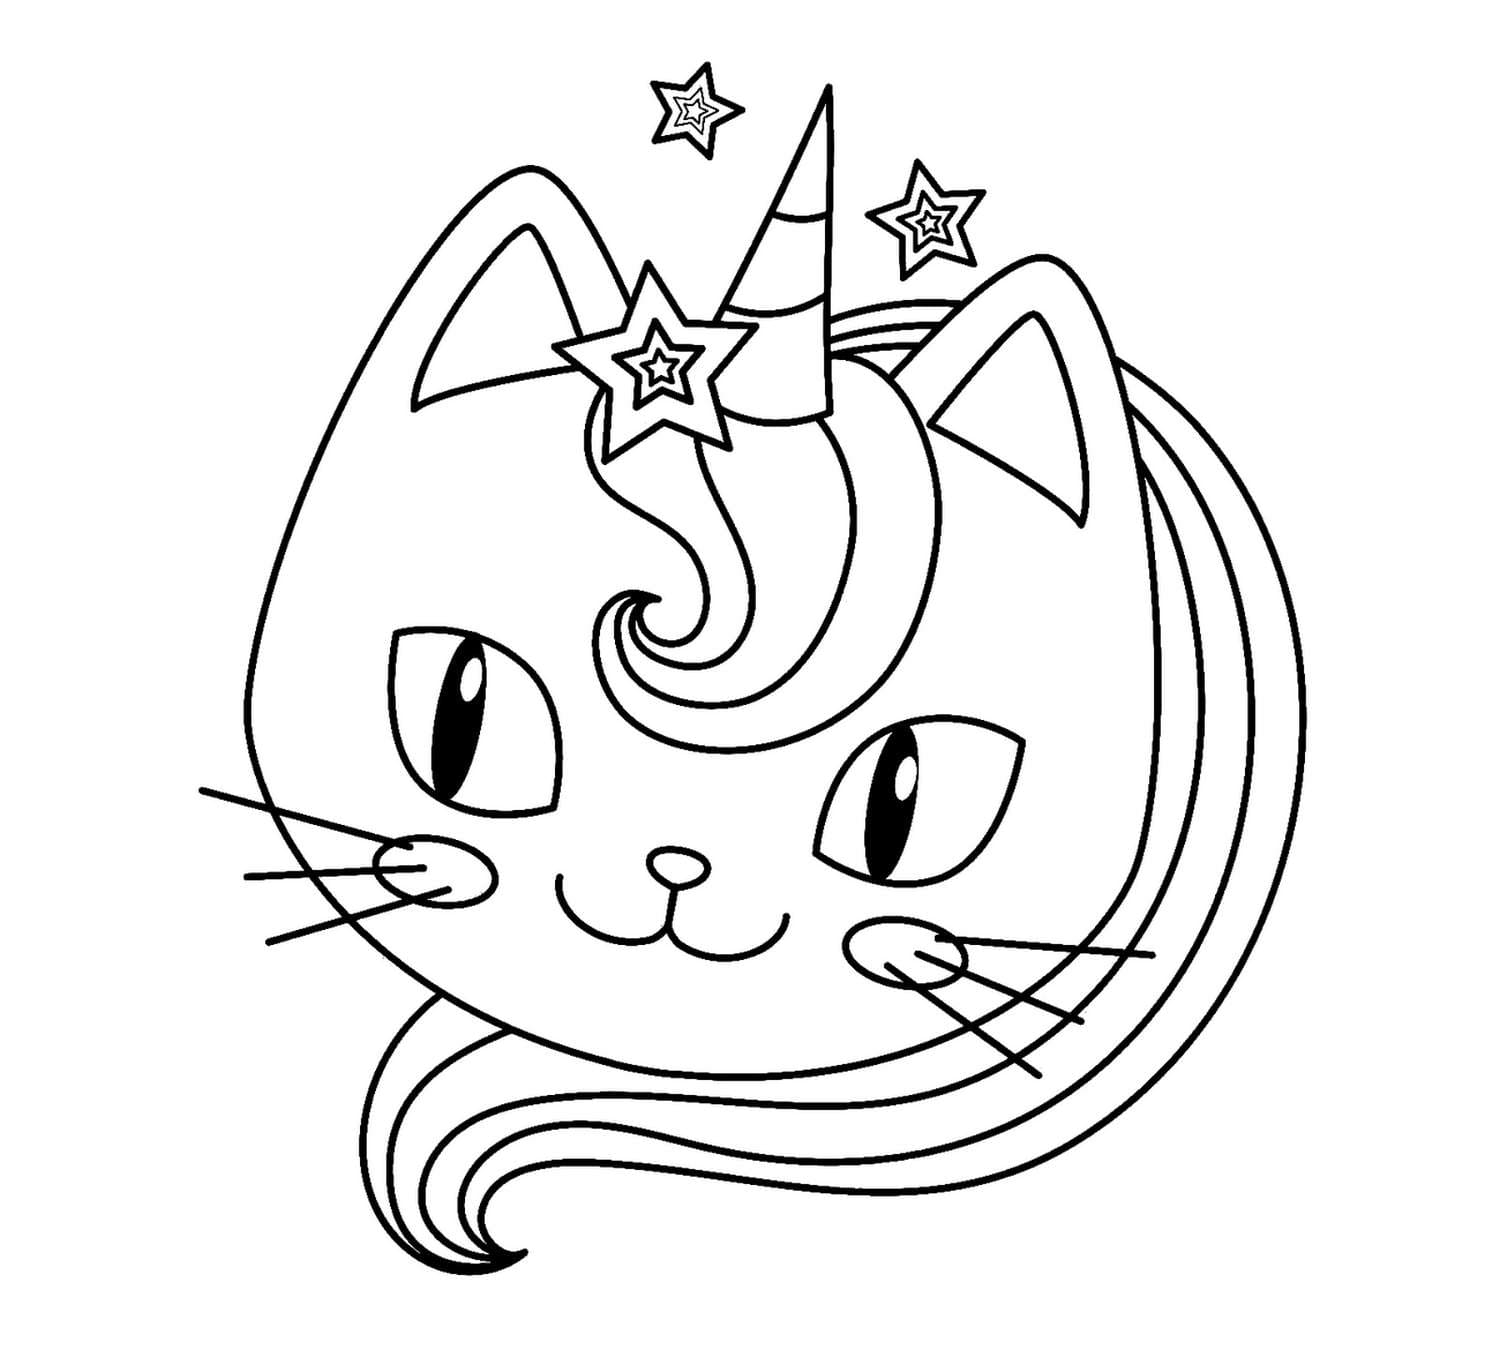 Coloring page Unicorn Cat Nice face